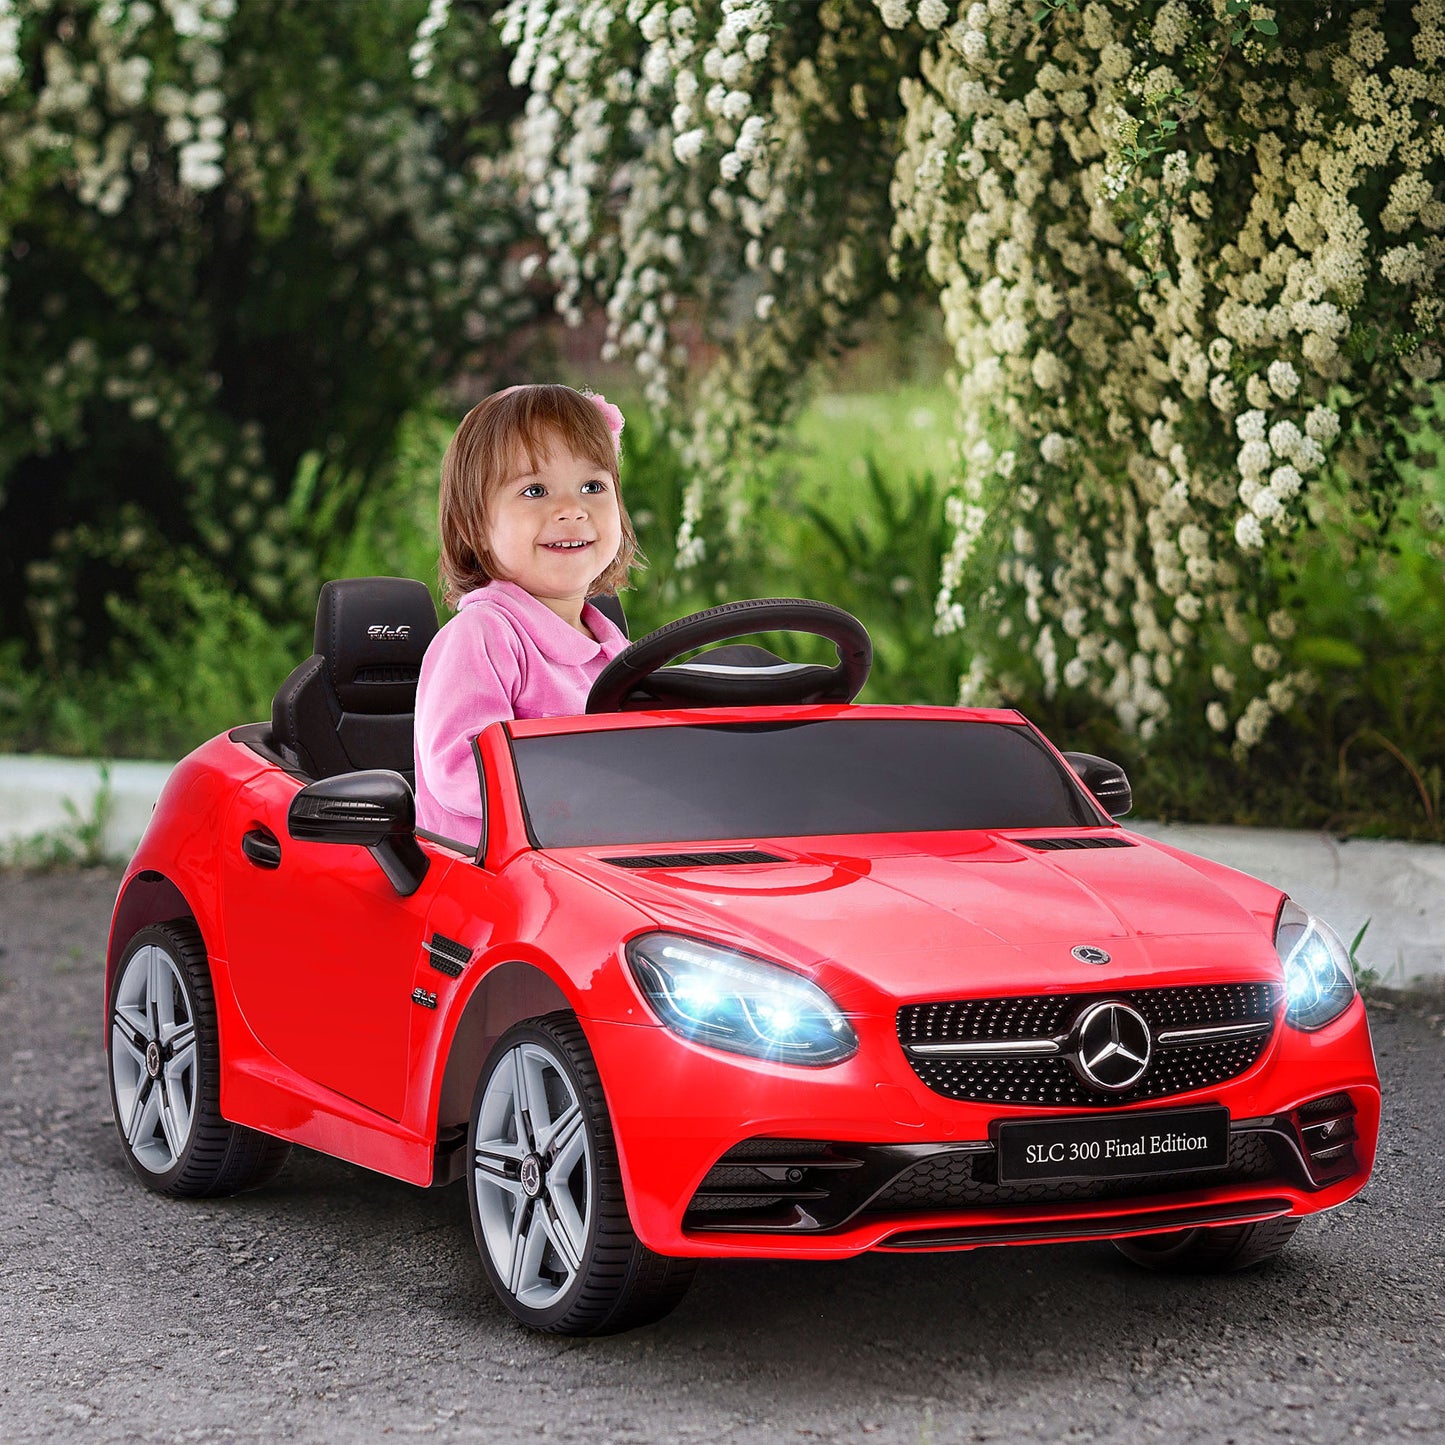 Toys and Games-12 V Kids Remote Ride On Car with Parent Remote Control, 2 Motors, Music, Lights & Suspension Wheels for 3-6 Years Old, Gift for Boys Girls, Red - Outdoor Style Company